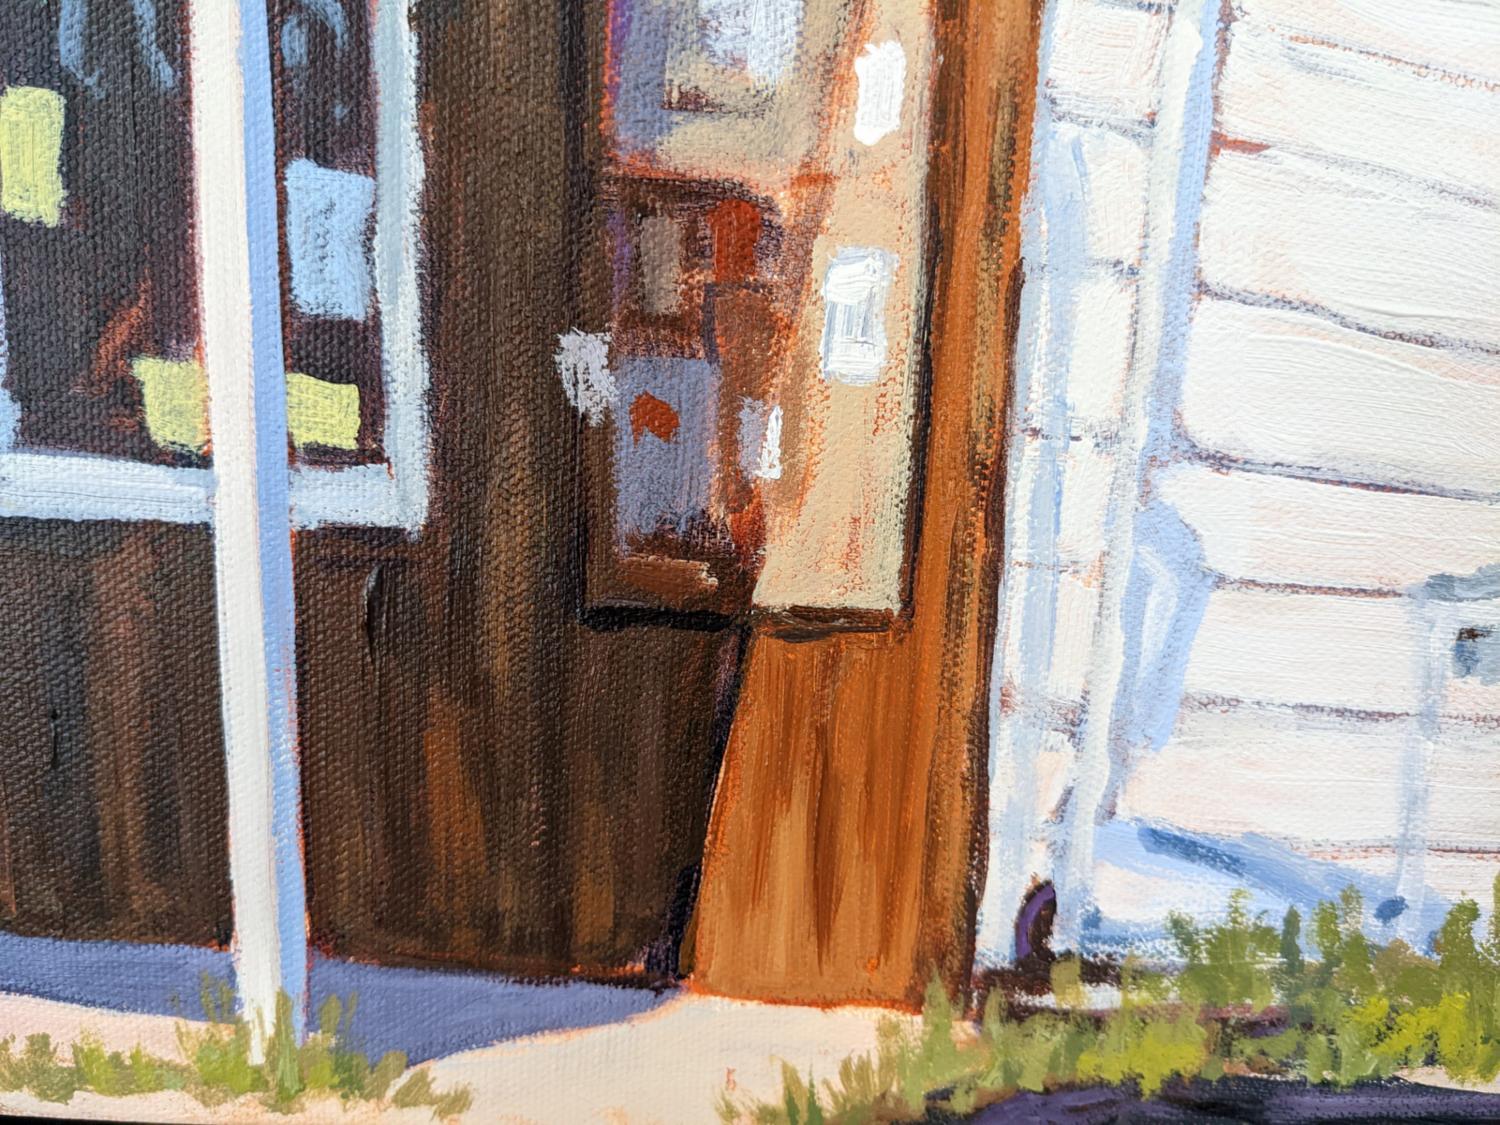 <p>Artist Comments<br />Artist Samuel Pretorius displays a rustic general store in the California countryside on a Sunday afternoon. He depicts the charming rural view in broad representational strokes. Samuel draws focus to the weathered wooden